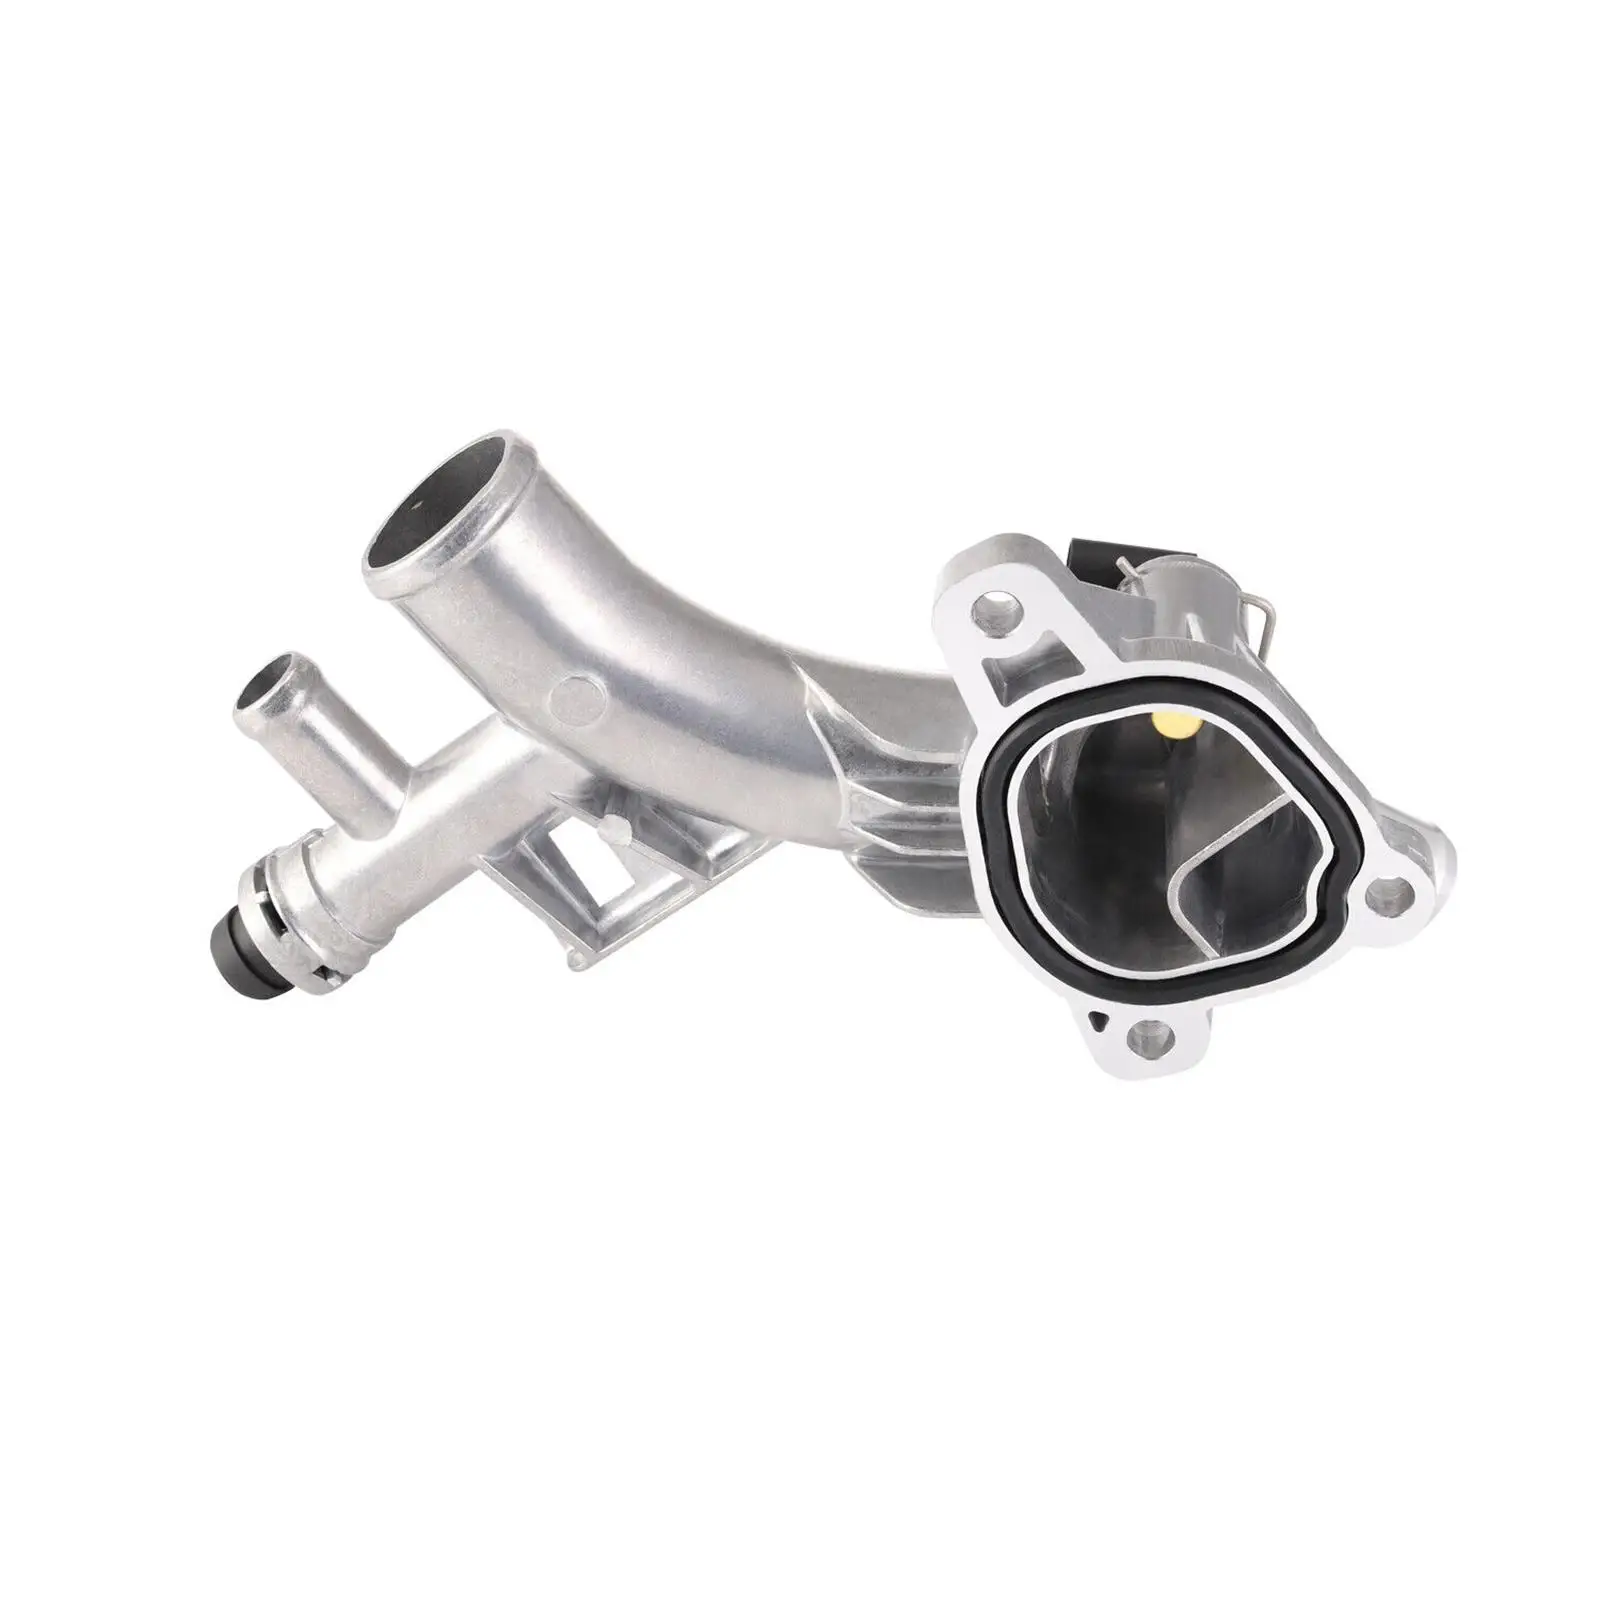 Water Outlet Thermostat Housing 55565334 Metal High Performance Replacement Parts for Chevrolet Cruze Trax 1.4L Accessories